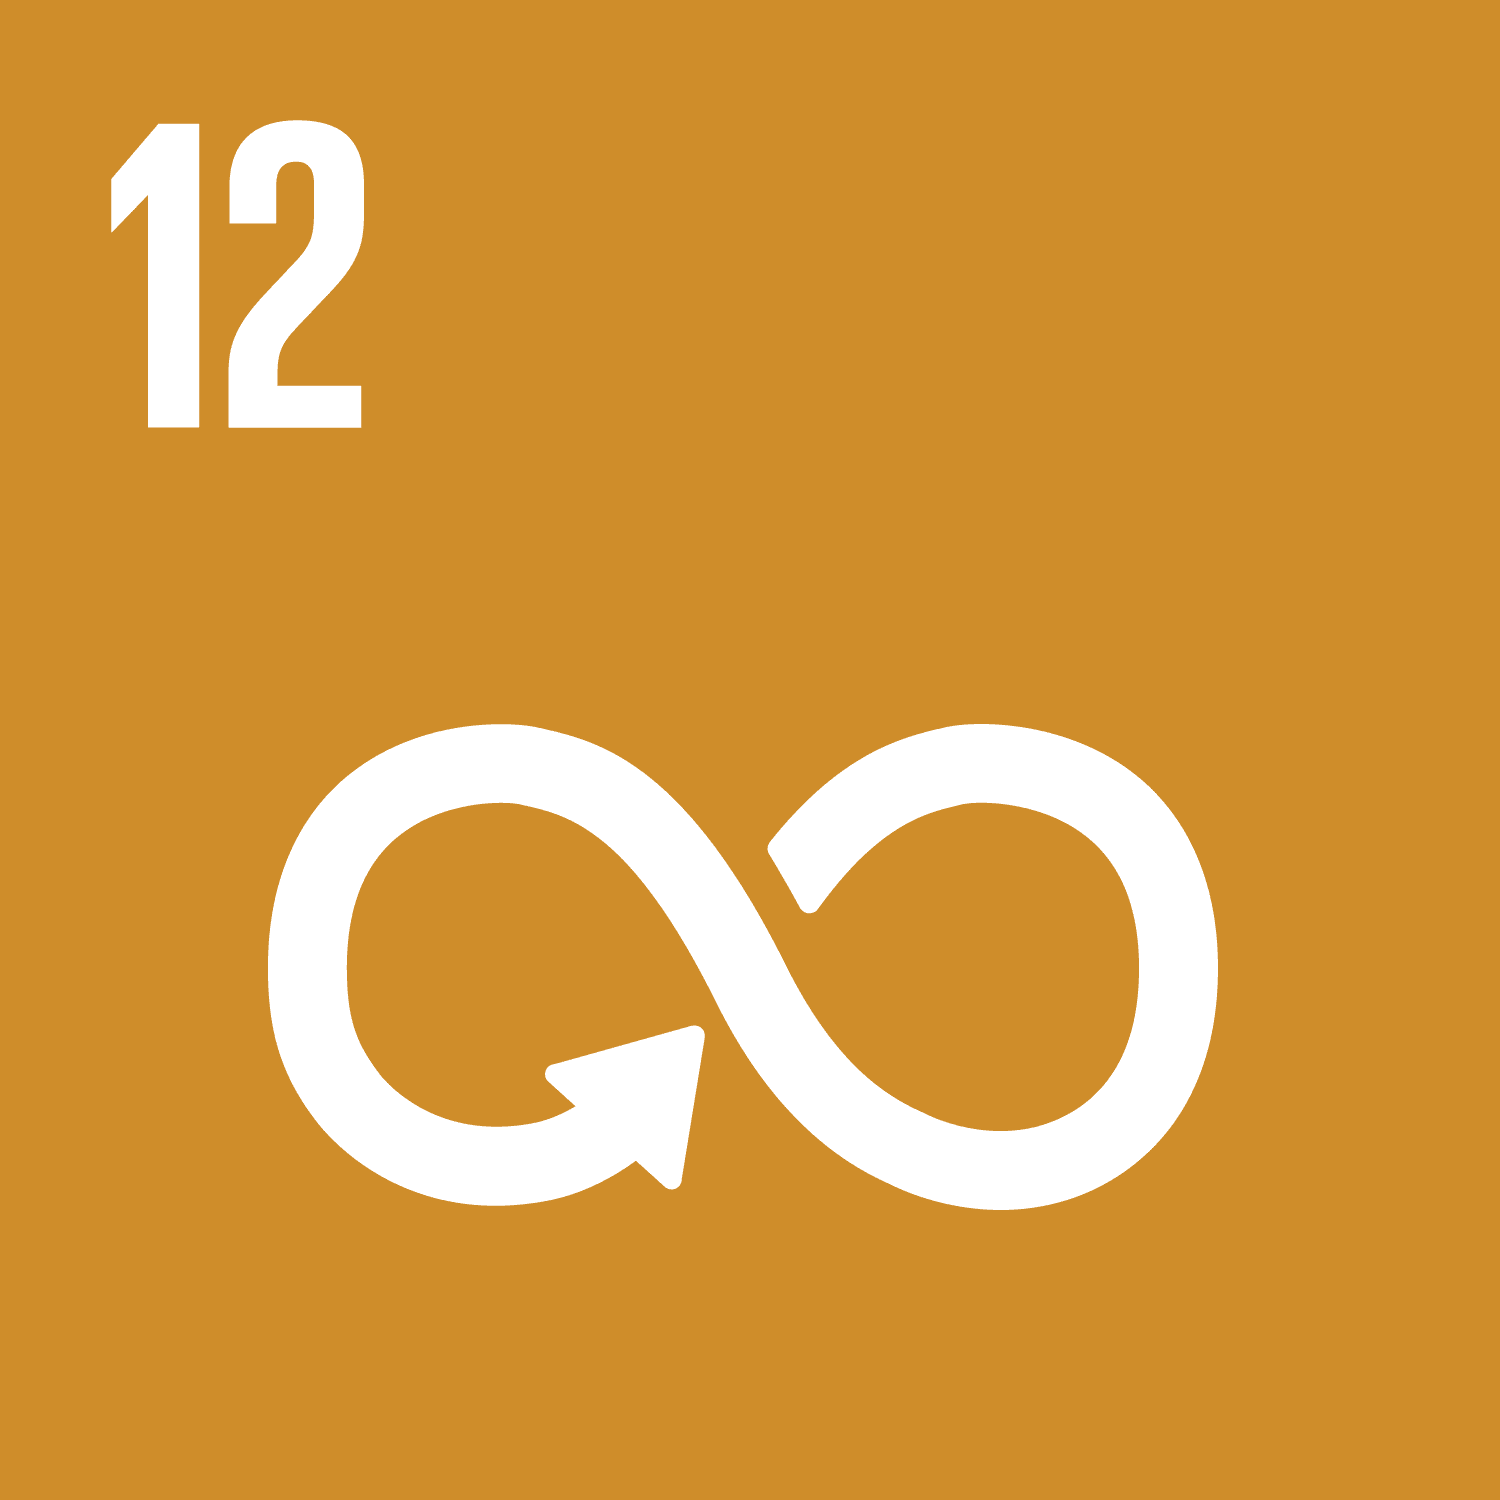 SDG 12. Responsible consumption and production.